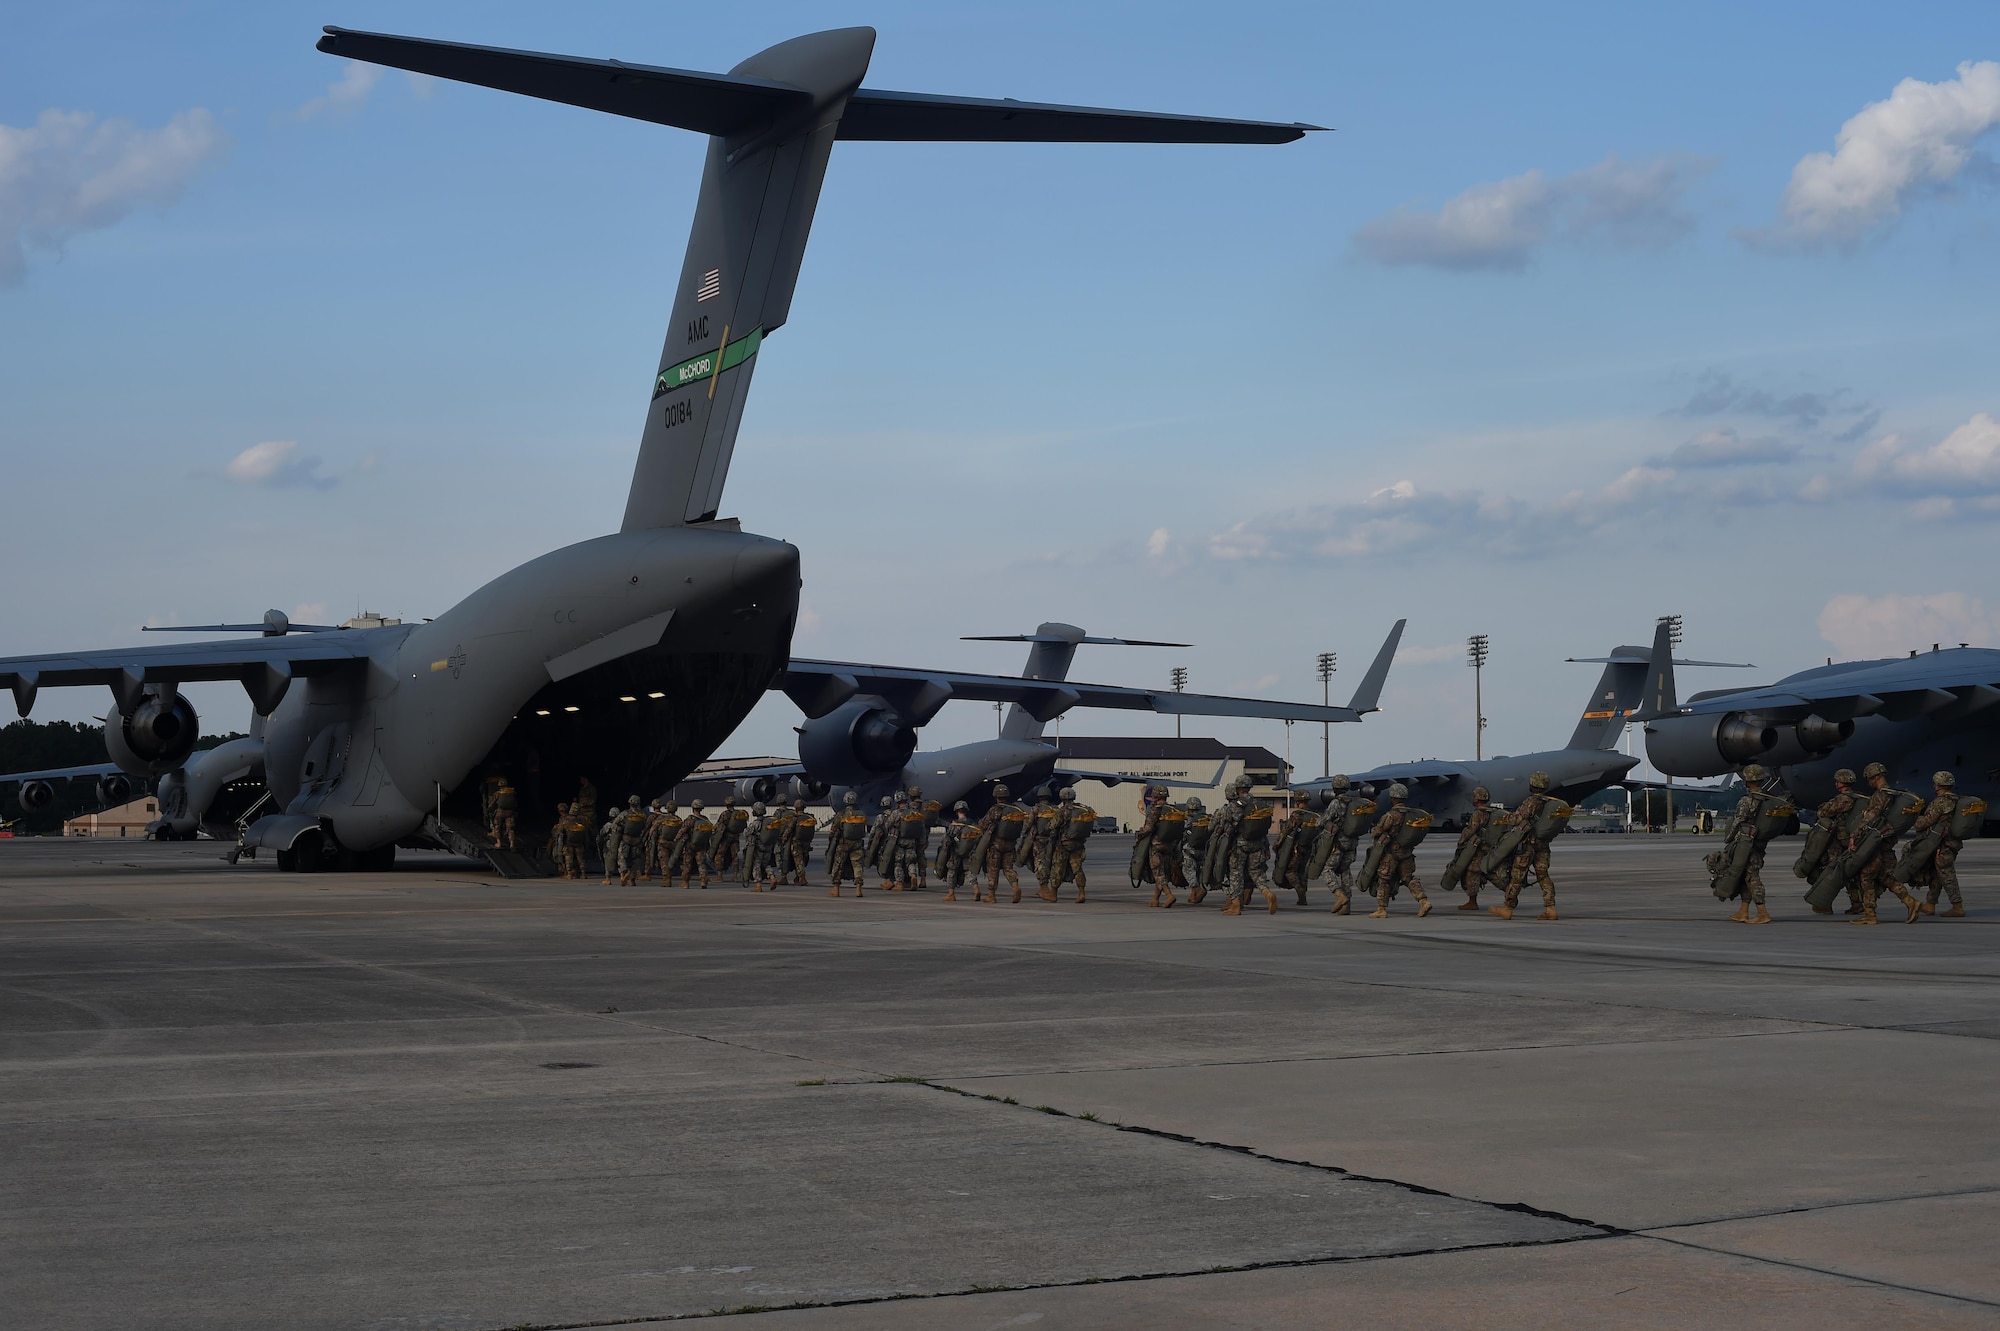 82nd Airborne Division Soldiers load into a 62nd Airlift Wing C-17 Globemaster III at Pope Army Air Field, North Carolina, June 4, 2016. Three McChord C-17’s and four C-17’s from Joint Base Charleston, South Carolina, air dropped more than 600 Army Soldiers over the range for training. (U.S. Air Force photo/Staff Sgt. Naomi Shipley)